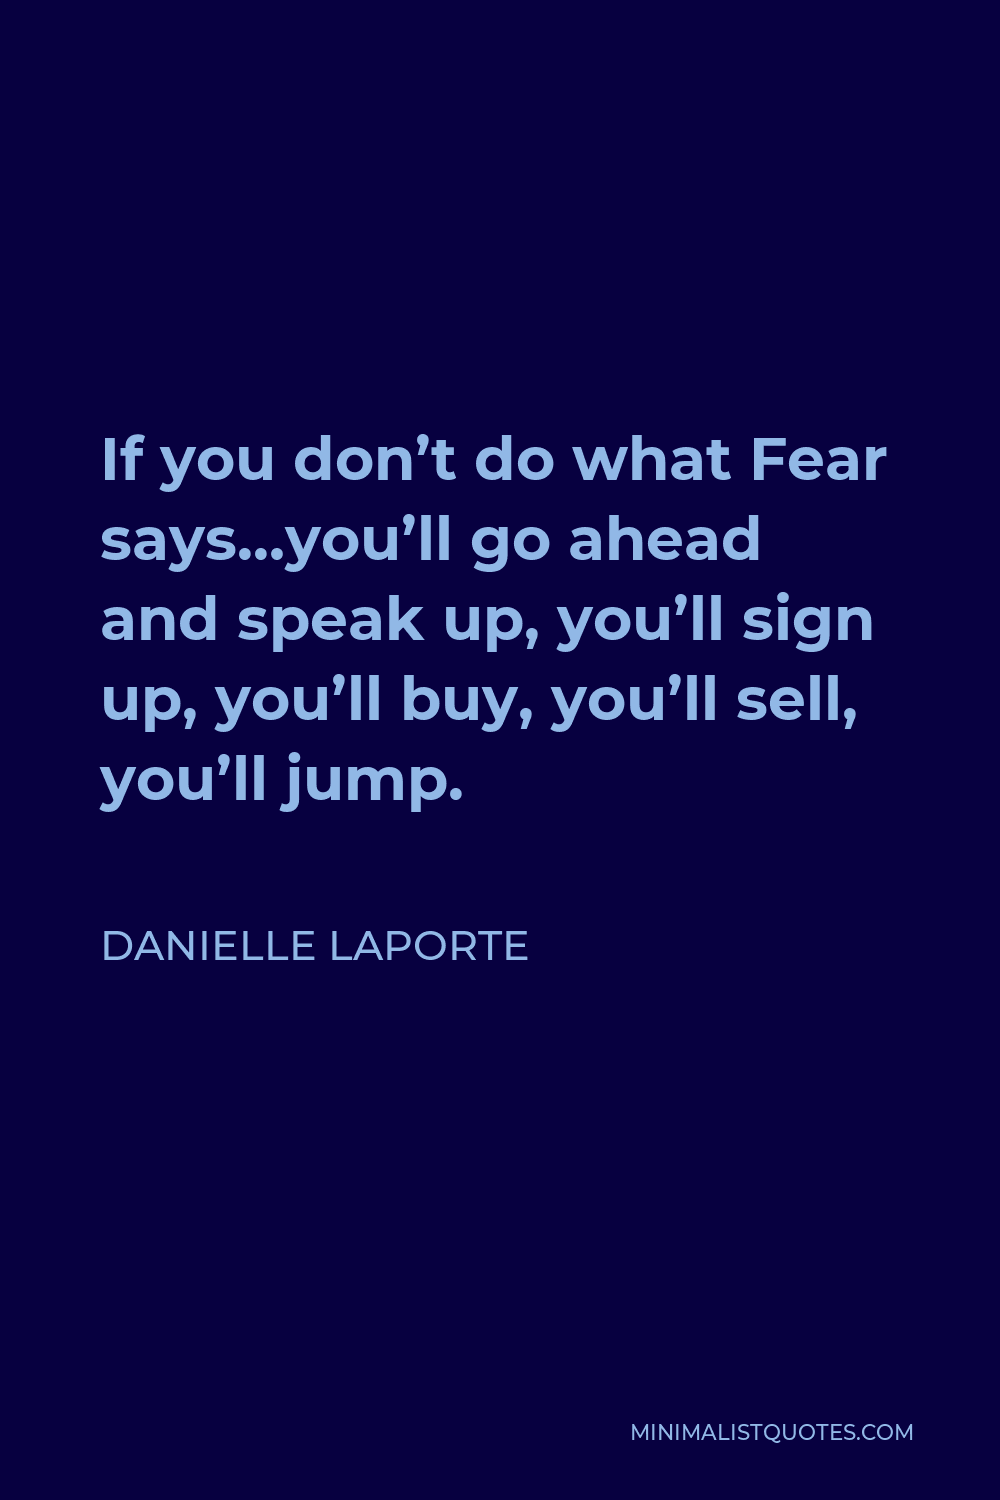 Danielle LaPorte Quote - If you don’t do what Fear says…you’ll go ahead and speak up, you’ll sign up, you’ll buy, you’ll sell, you’ll jump.